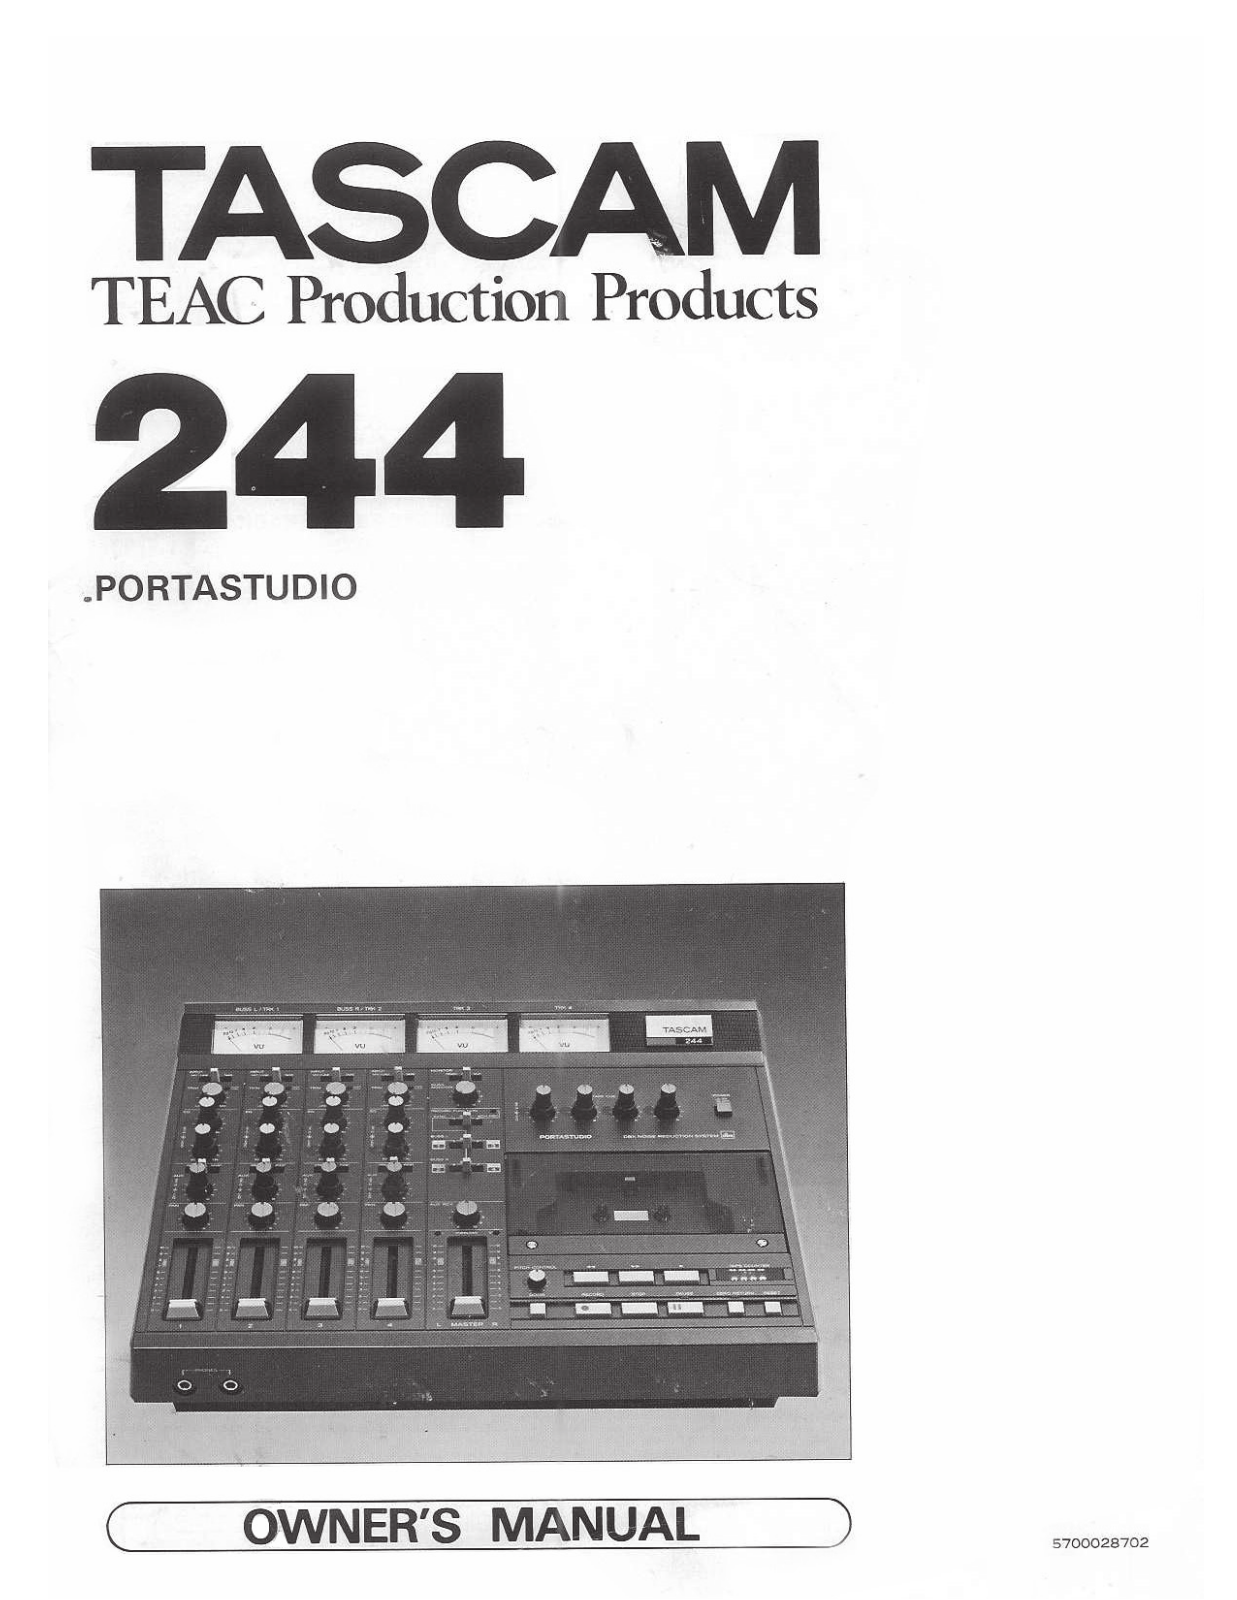 Tascam 244 Owners manual